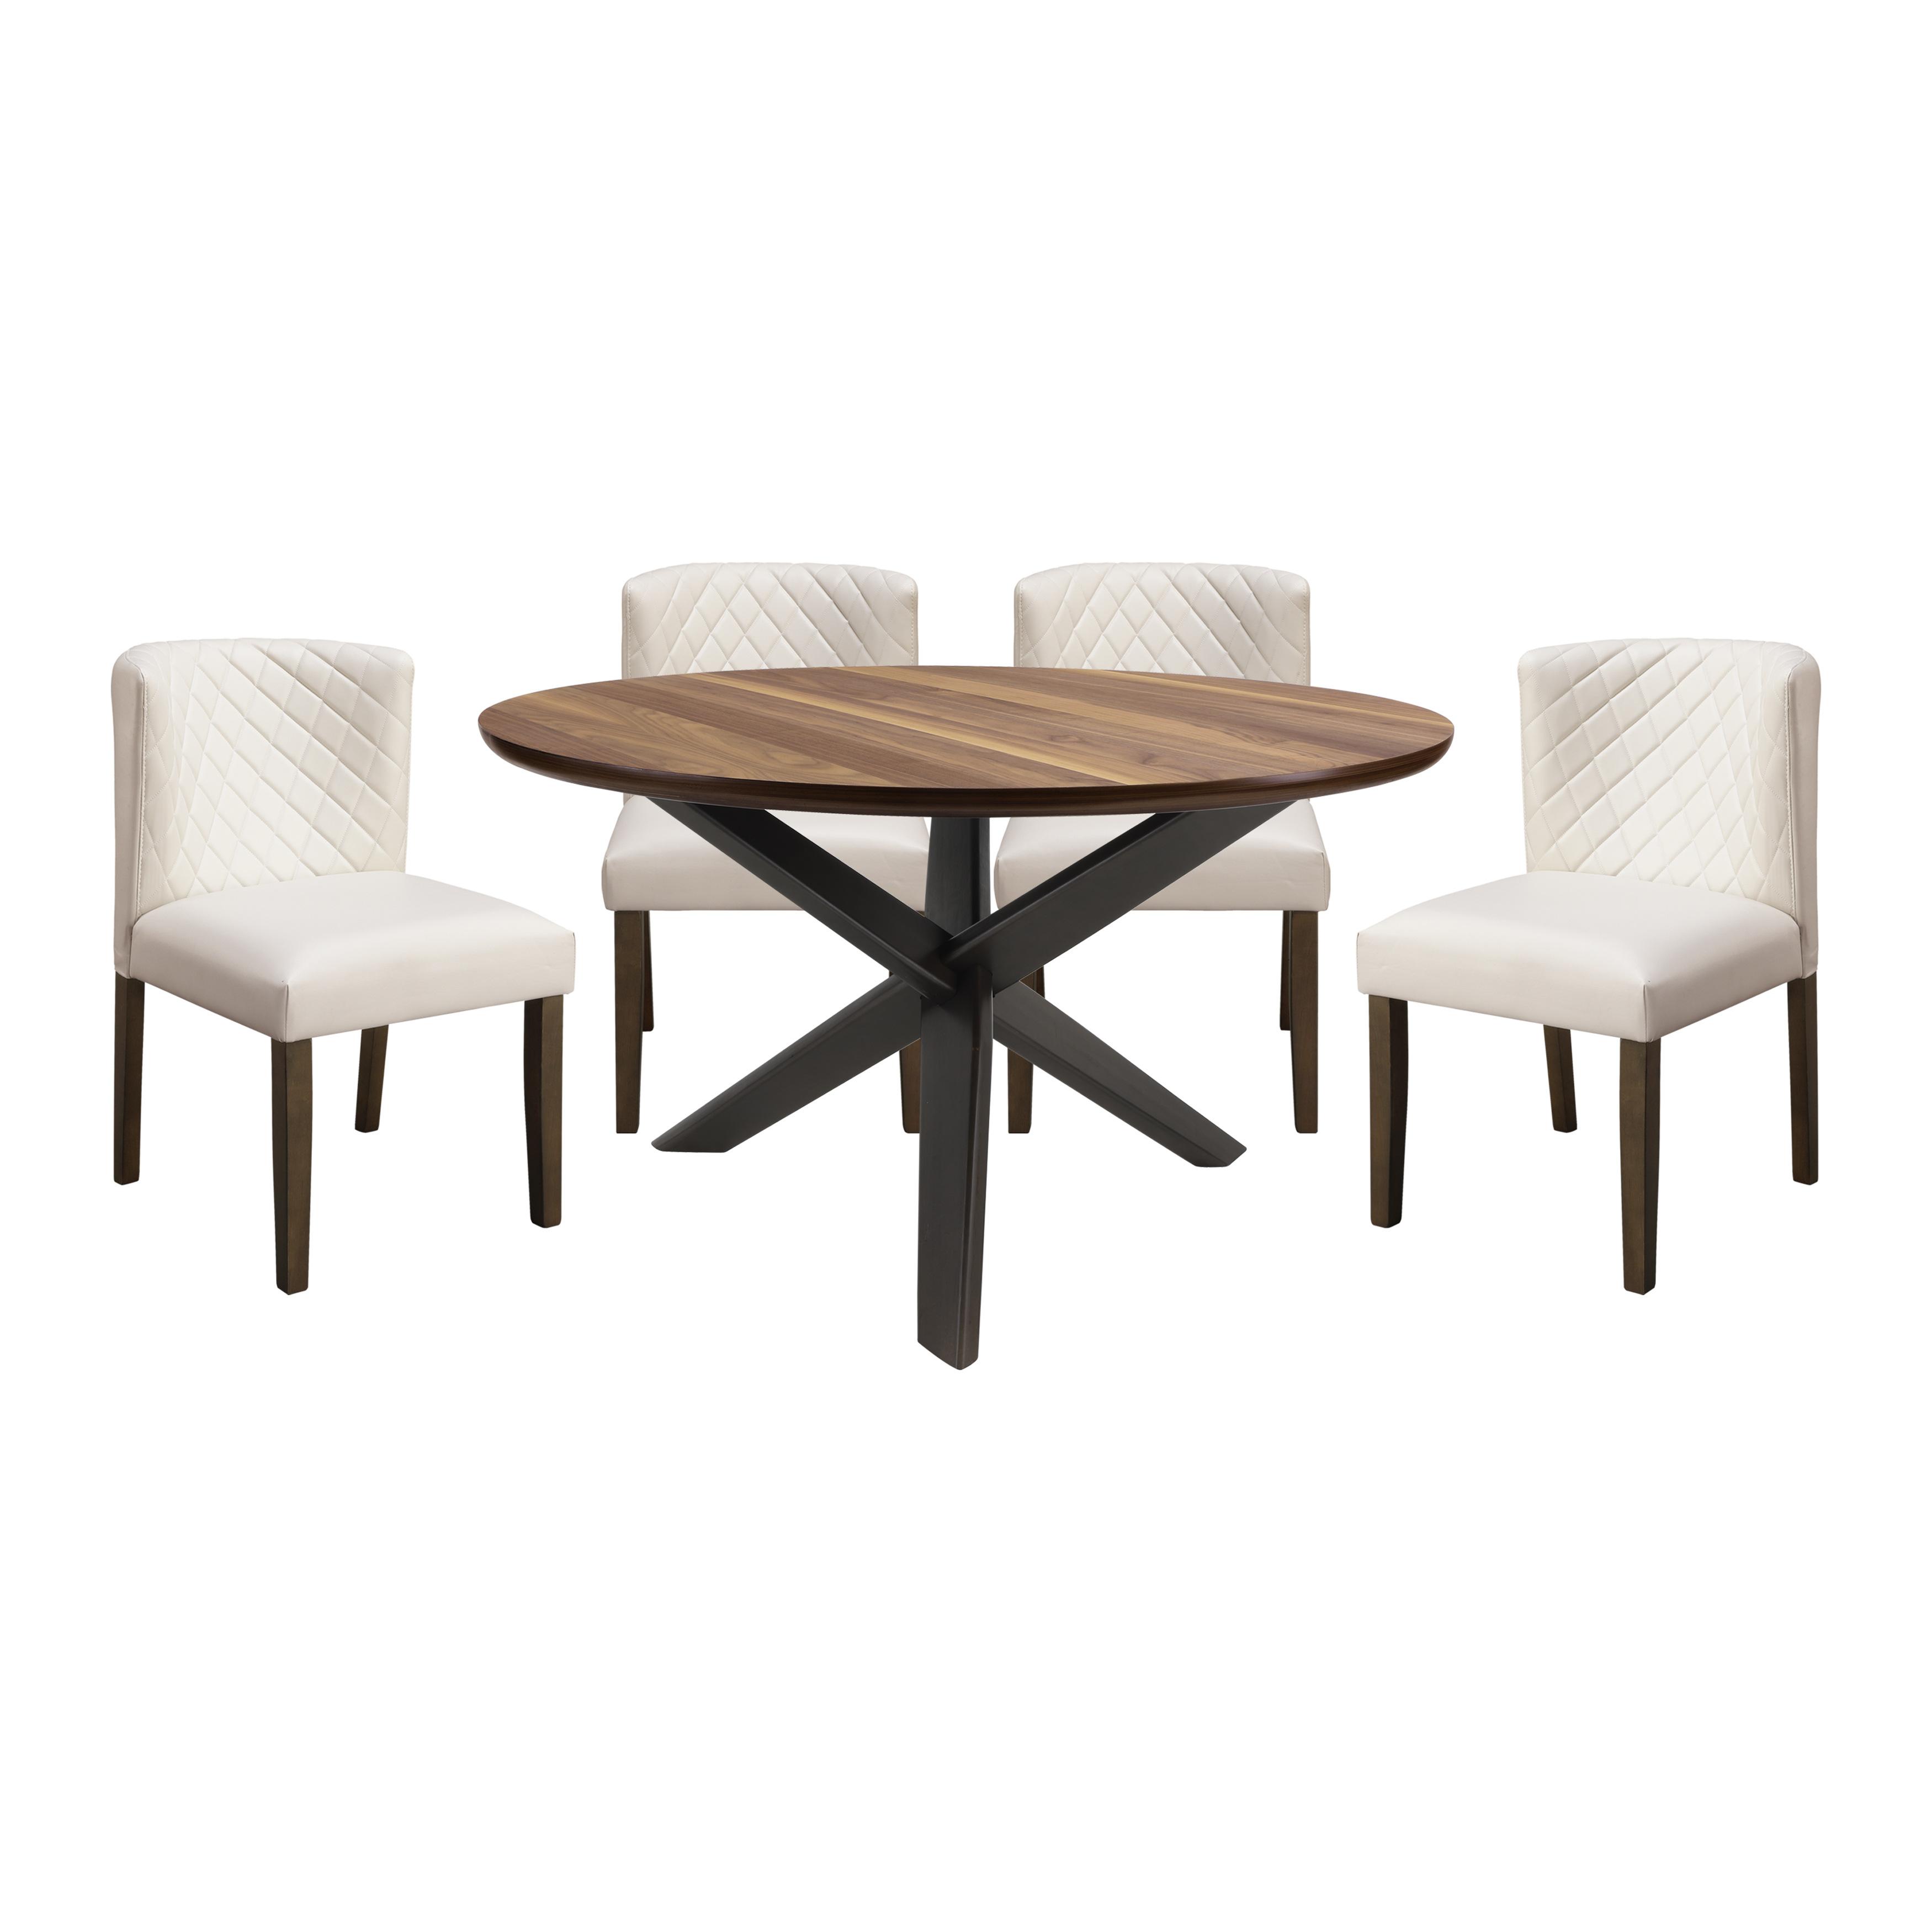 Modern Dining Room Set 5597-53*5PC Nelina 5597-53*5PC in Espresso Faux Leather